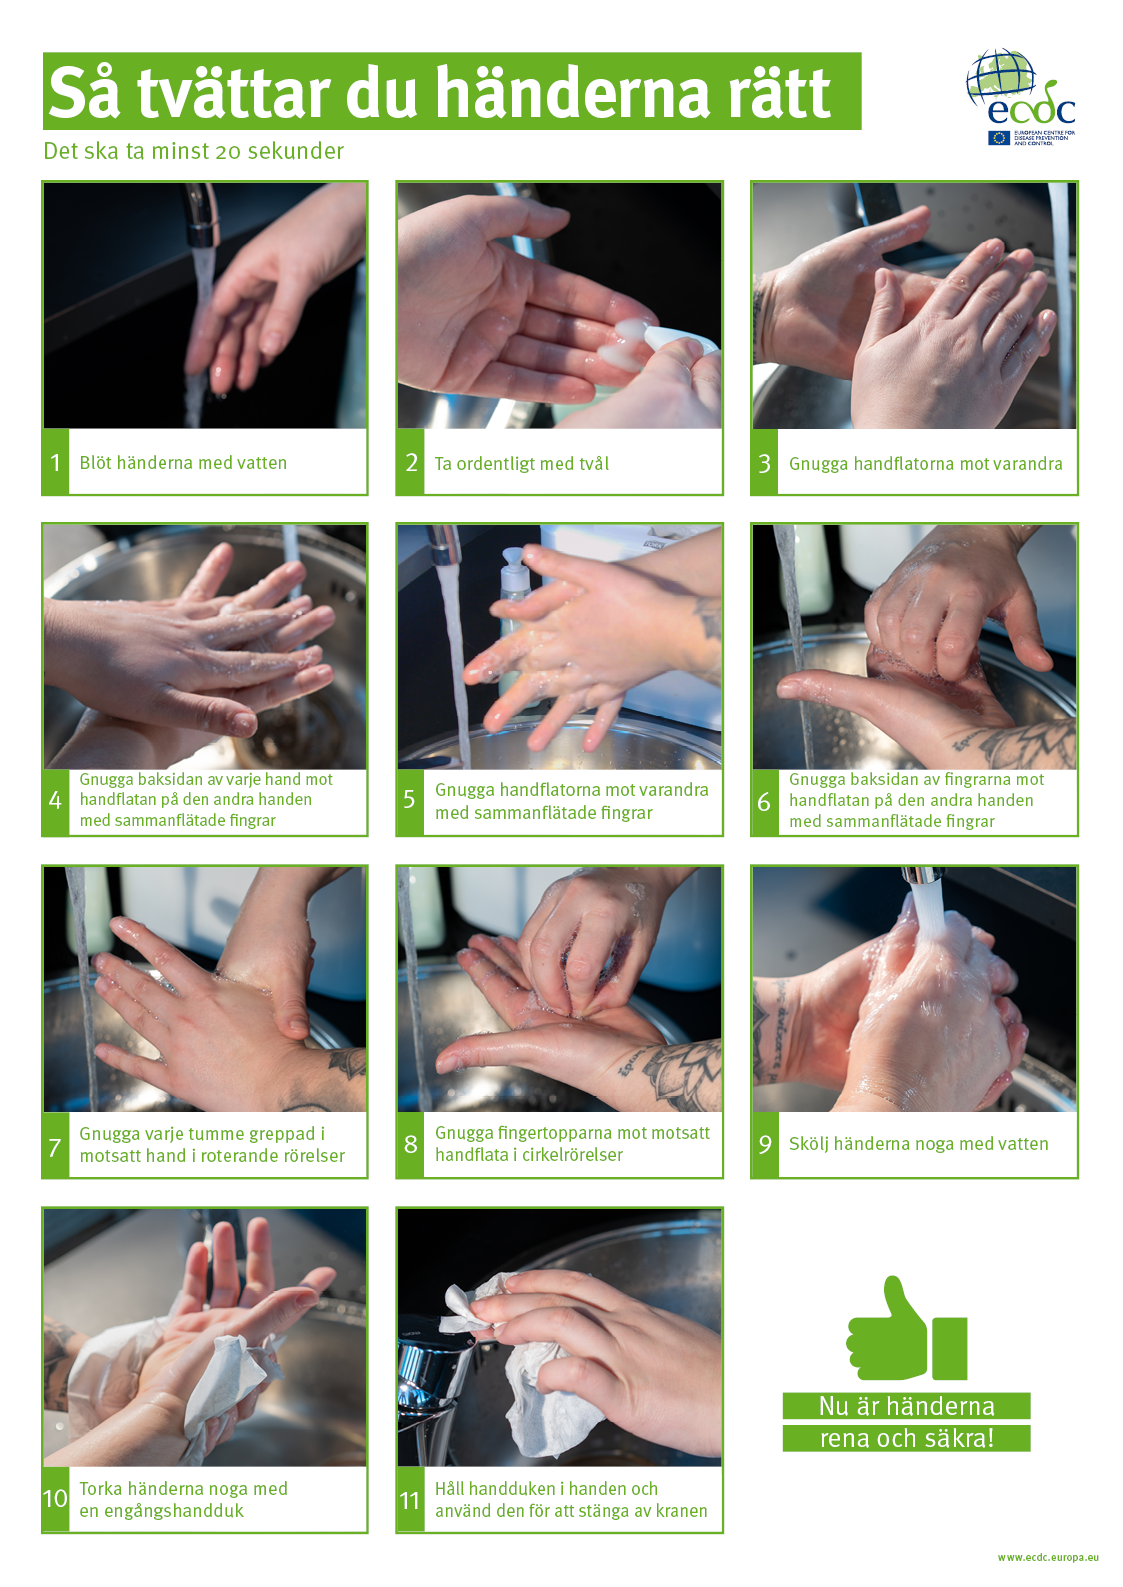 Cleaning your Hands Correctly during COVID-19 and Beyond - Surewash